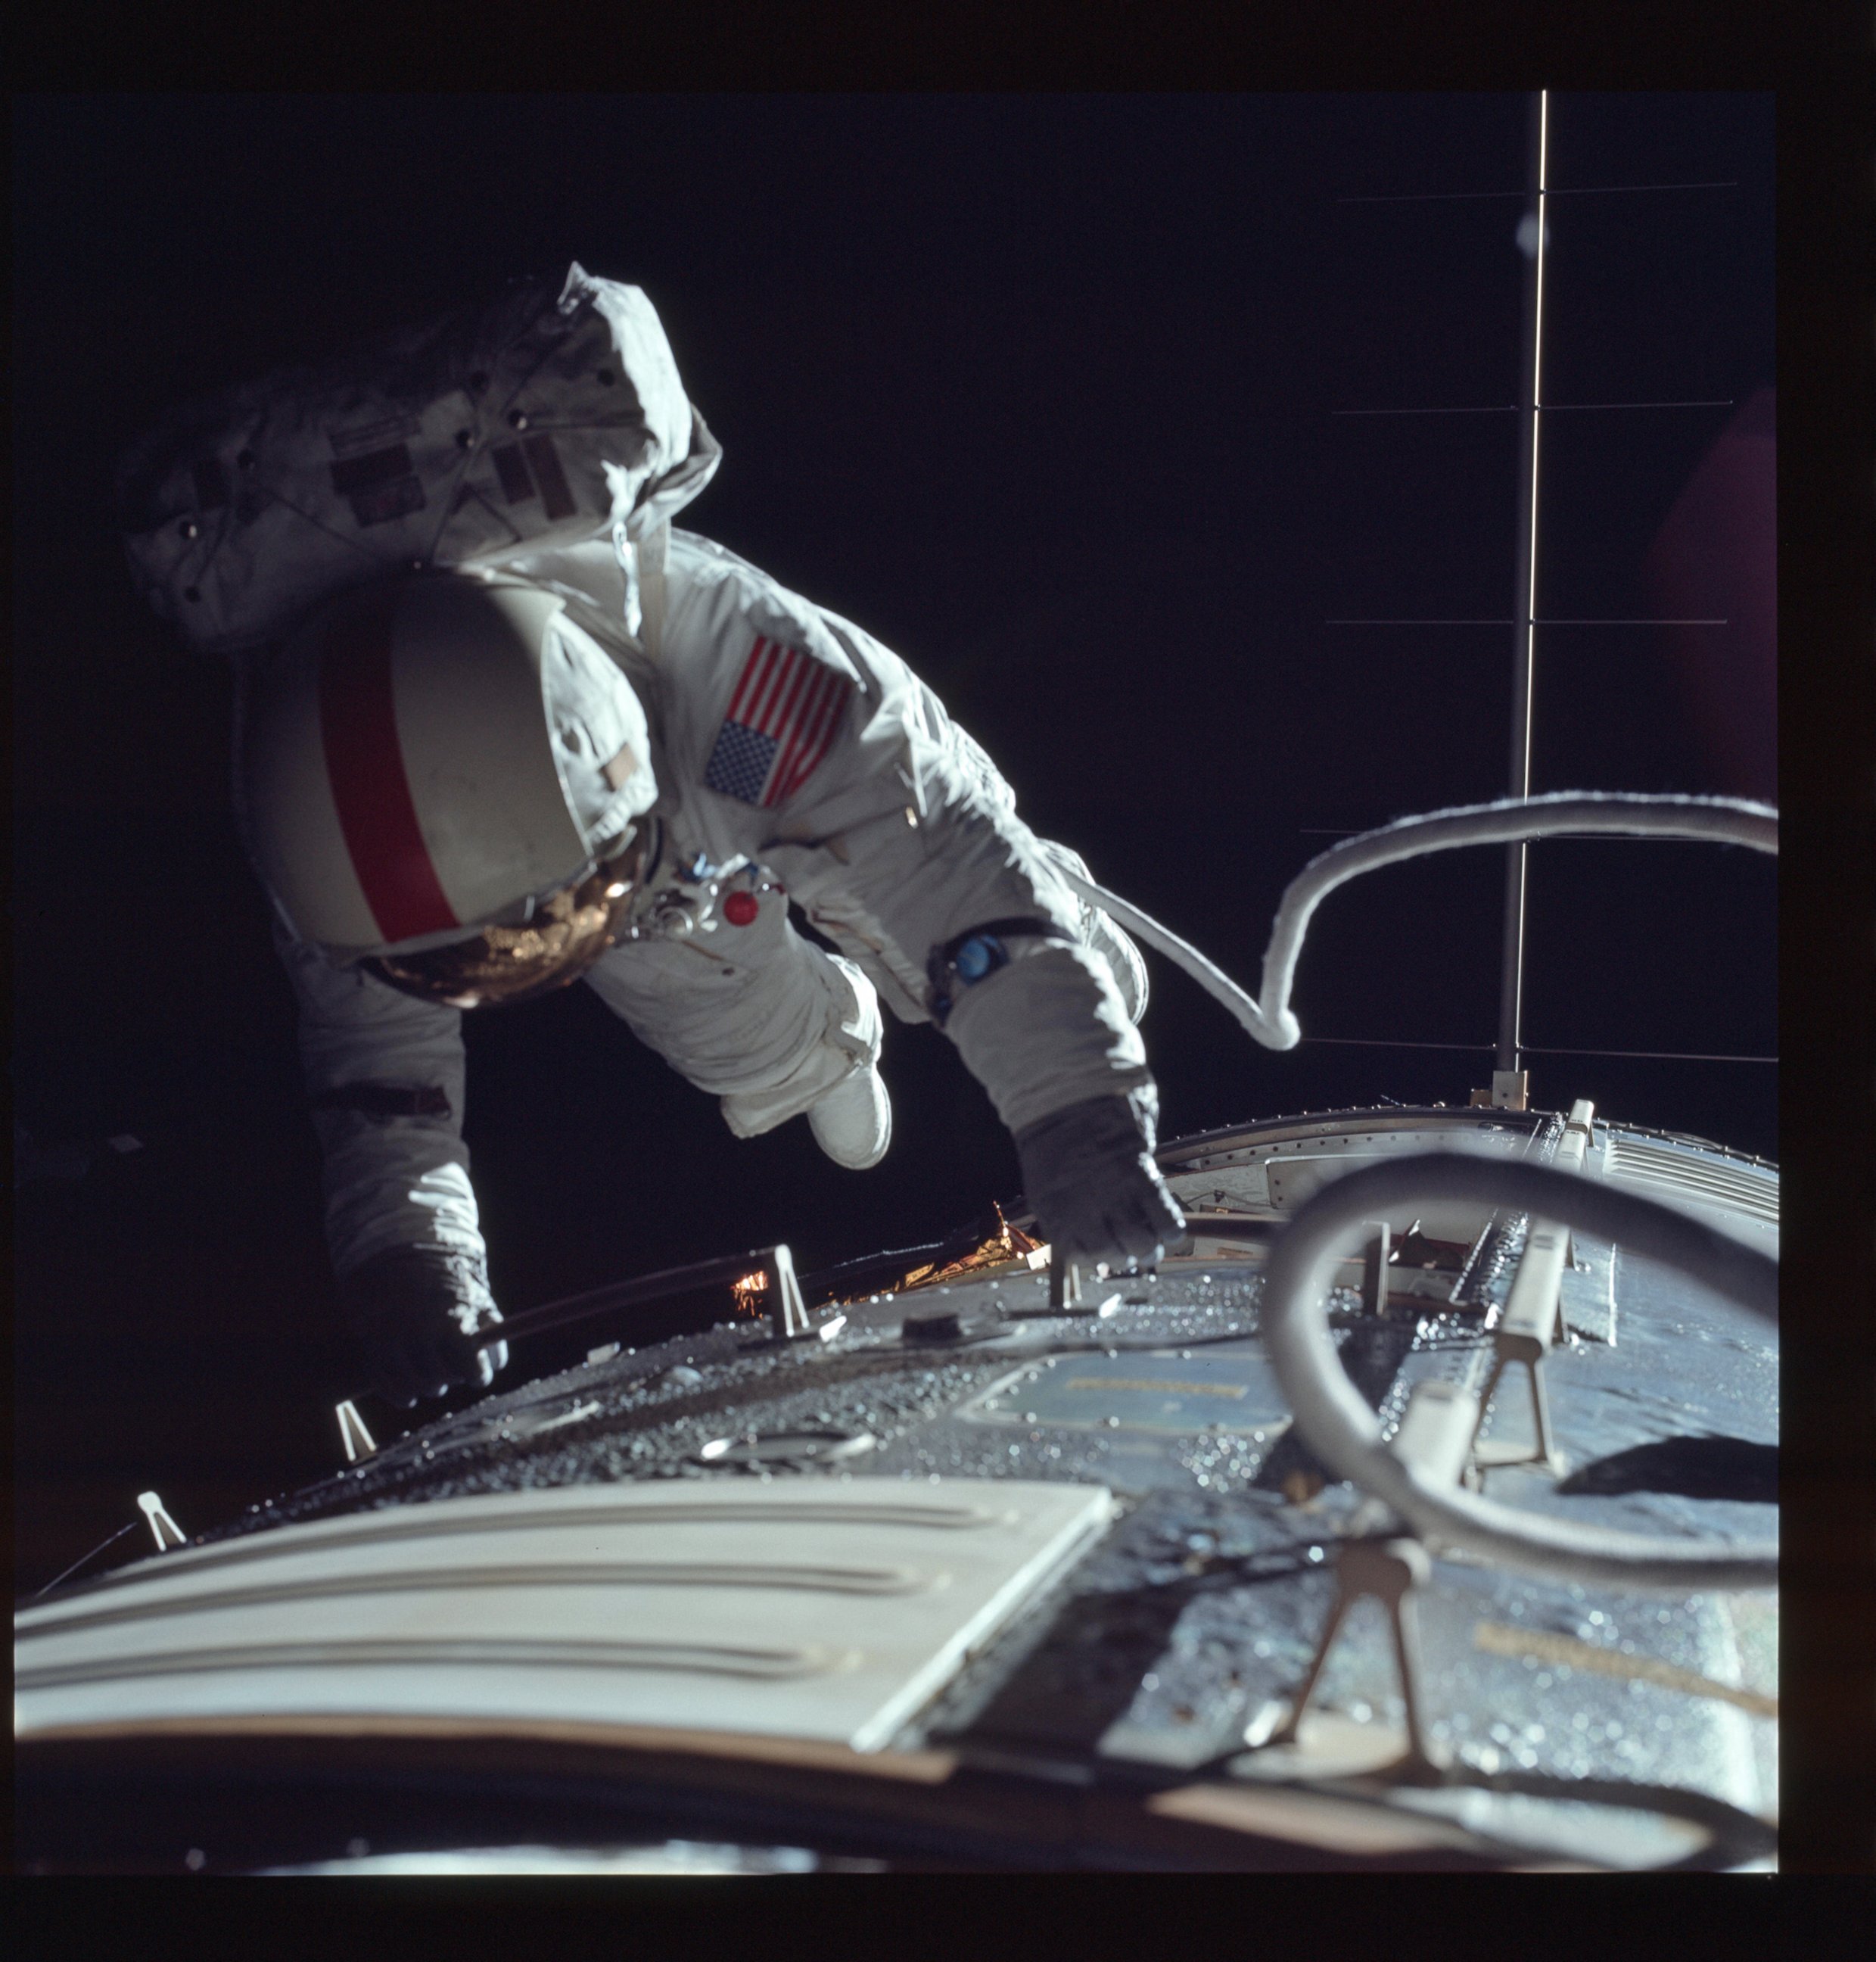 PHOTO: The Project Apollo Archive released thousands of images made by NASA astronauts during several missions to the moon in their original unprocessed condition.